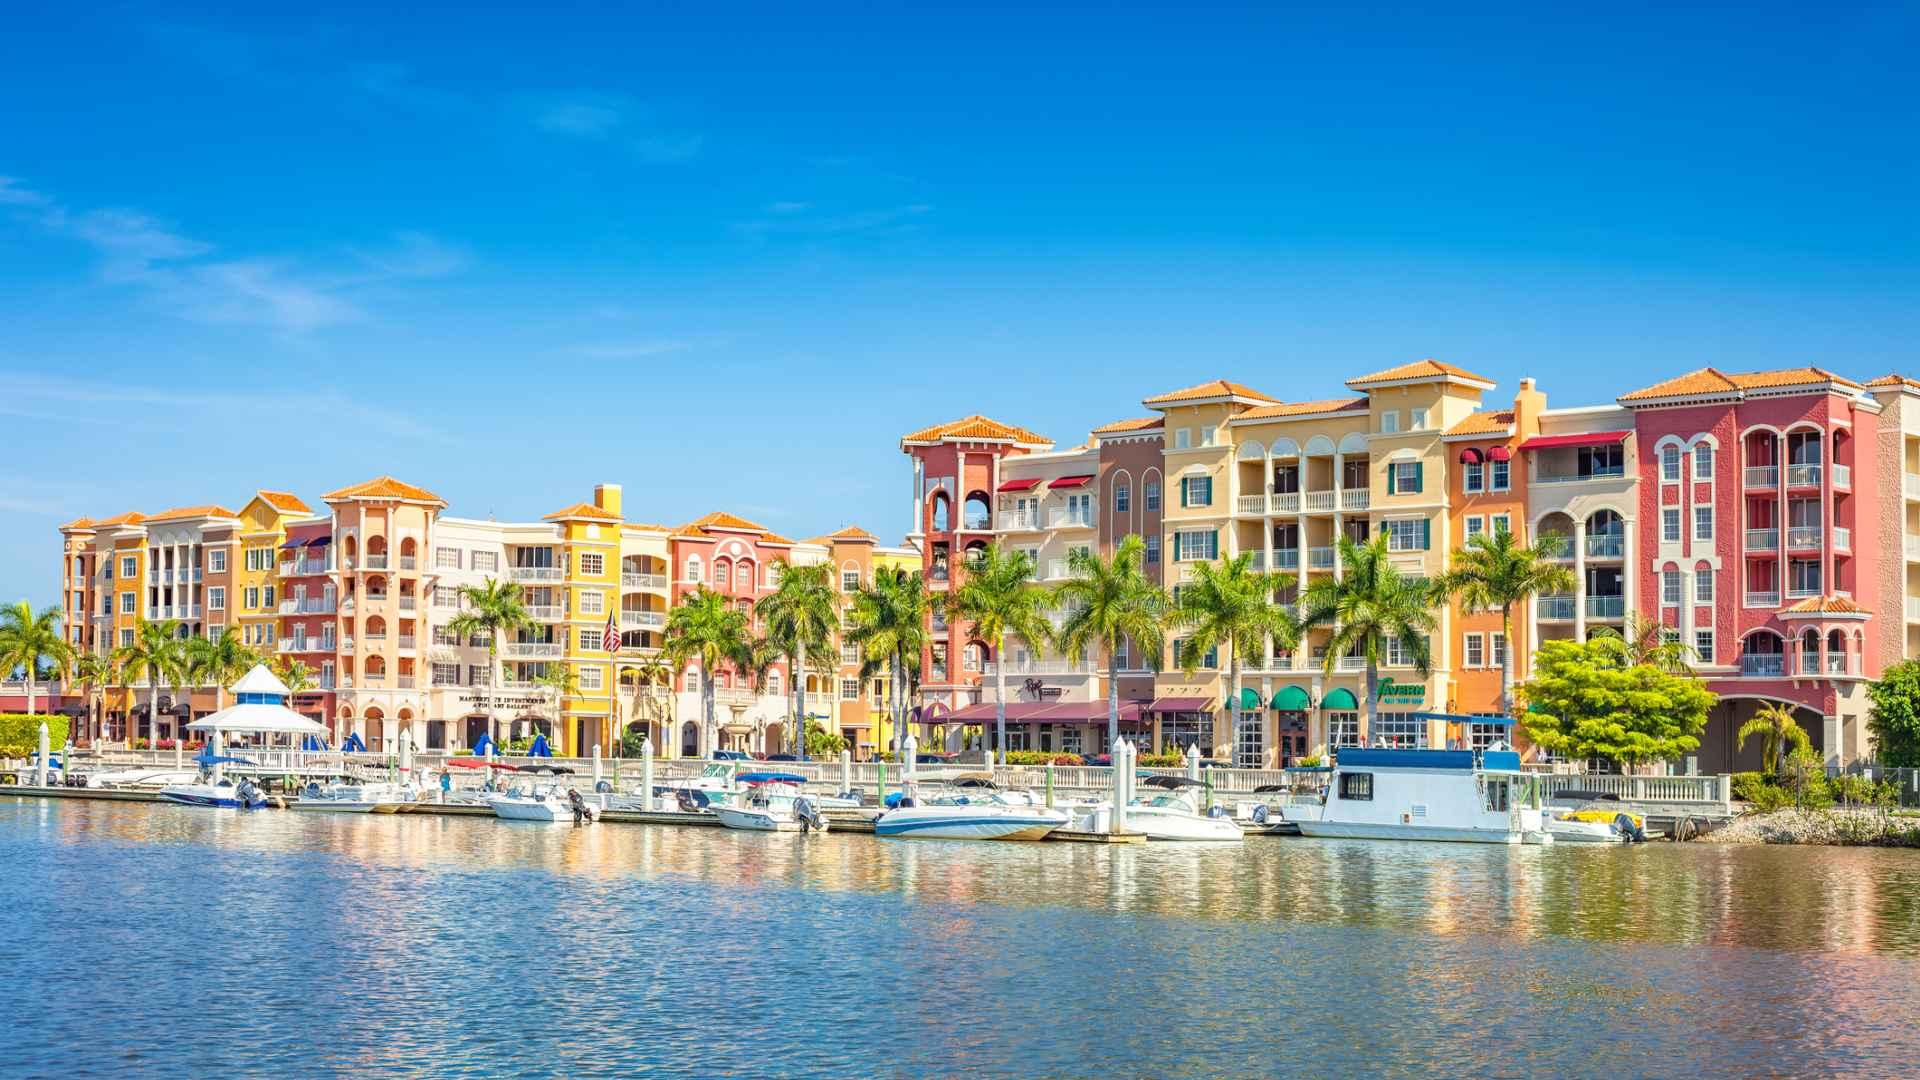 10 US Cities for Snowbirds: Here’s How Much Homes Cost in Each